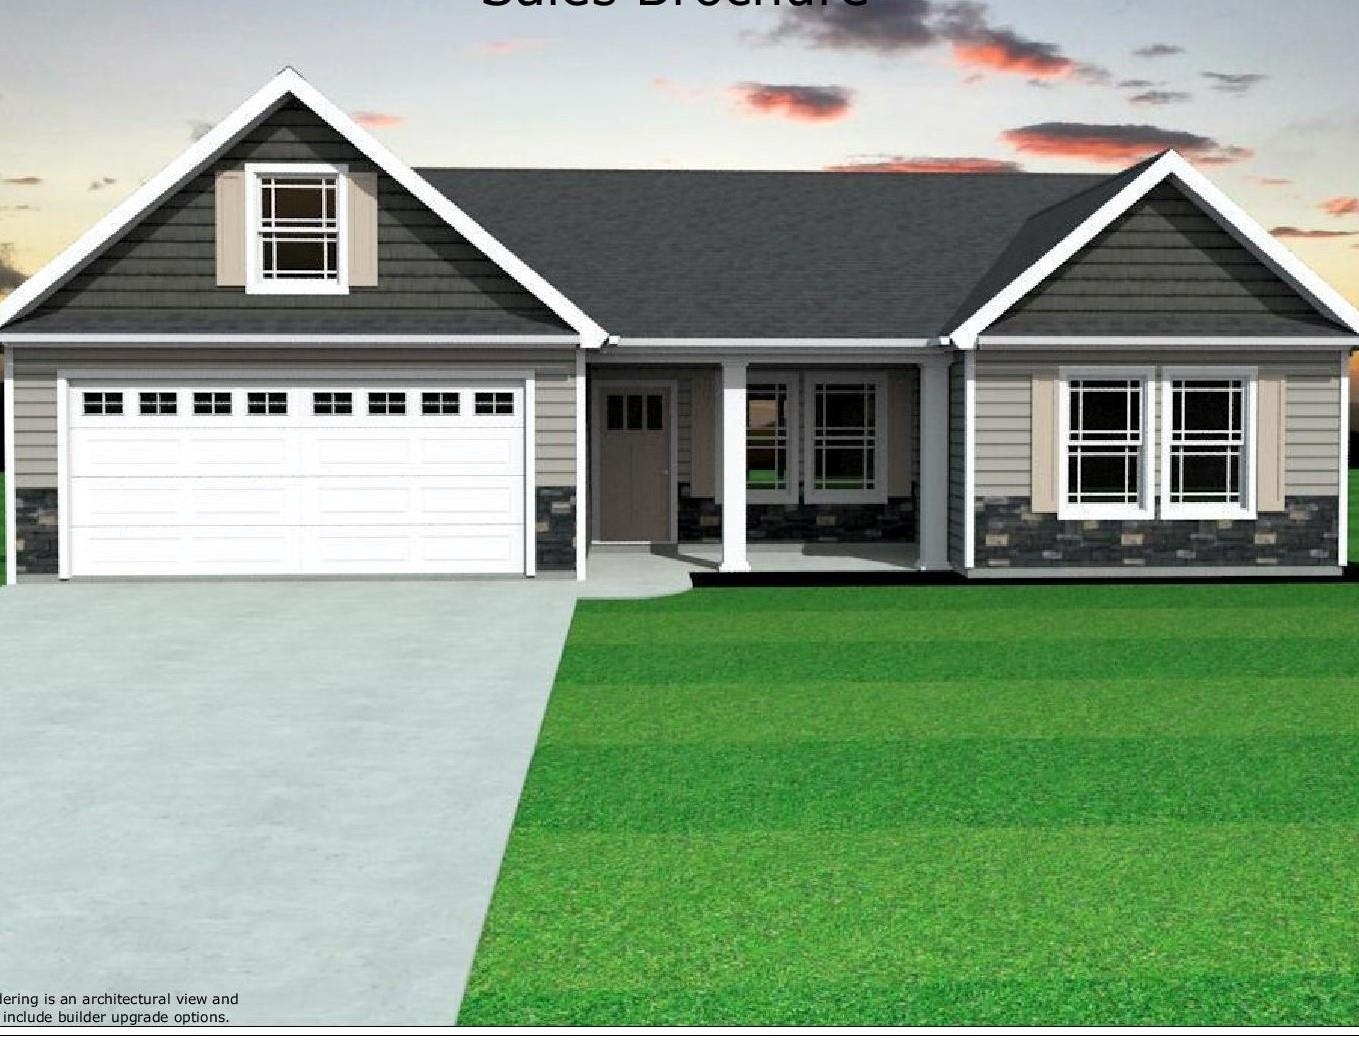 This is the STARTEX Floorplan. Open concept 3 bedroom, 2 bathroom home. Standard features include granite countertops, gas fireplace, trey ceiling in master bedroom and a 12x12 back patio. Located in the NEW Elliott Park community in Lyman just minutes from Spartanburg and Greenville. Call today for more info!